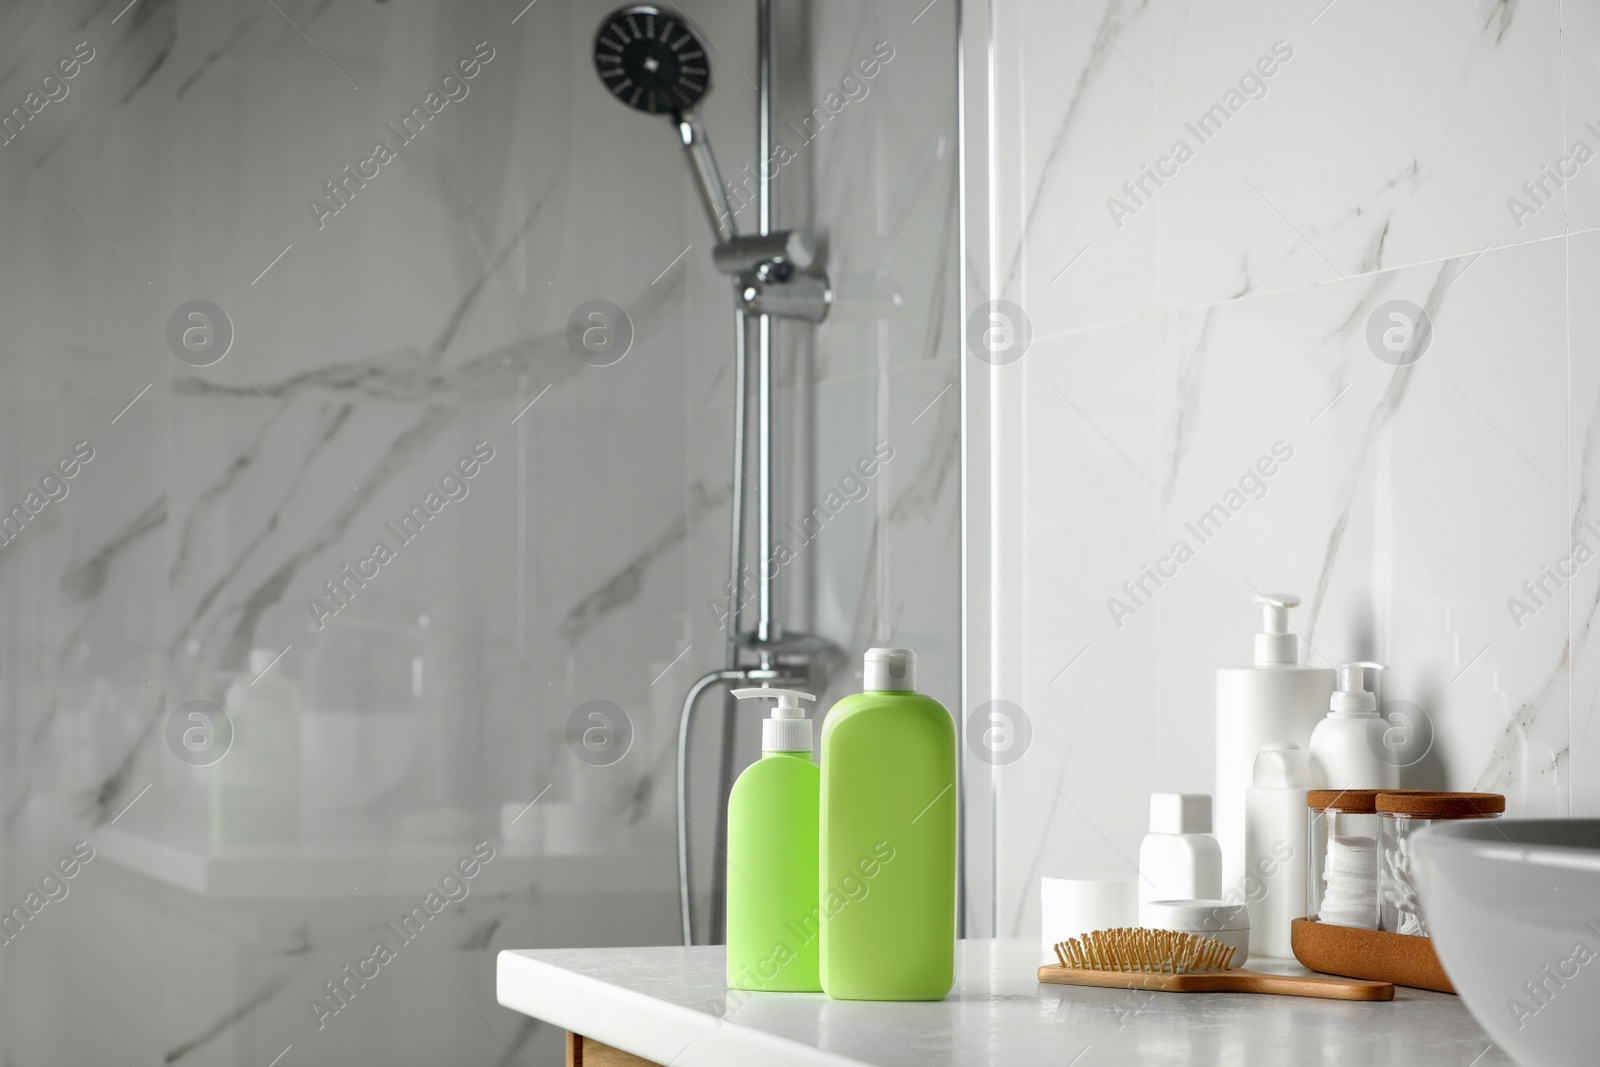 Photo of Shampoo, conditioner, other toiletries and wooden hairbrush on white table near shower stall in bathroom, space for text